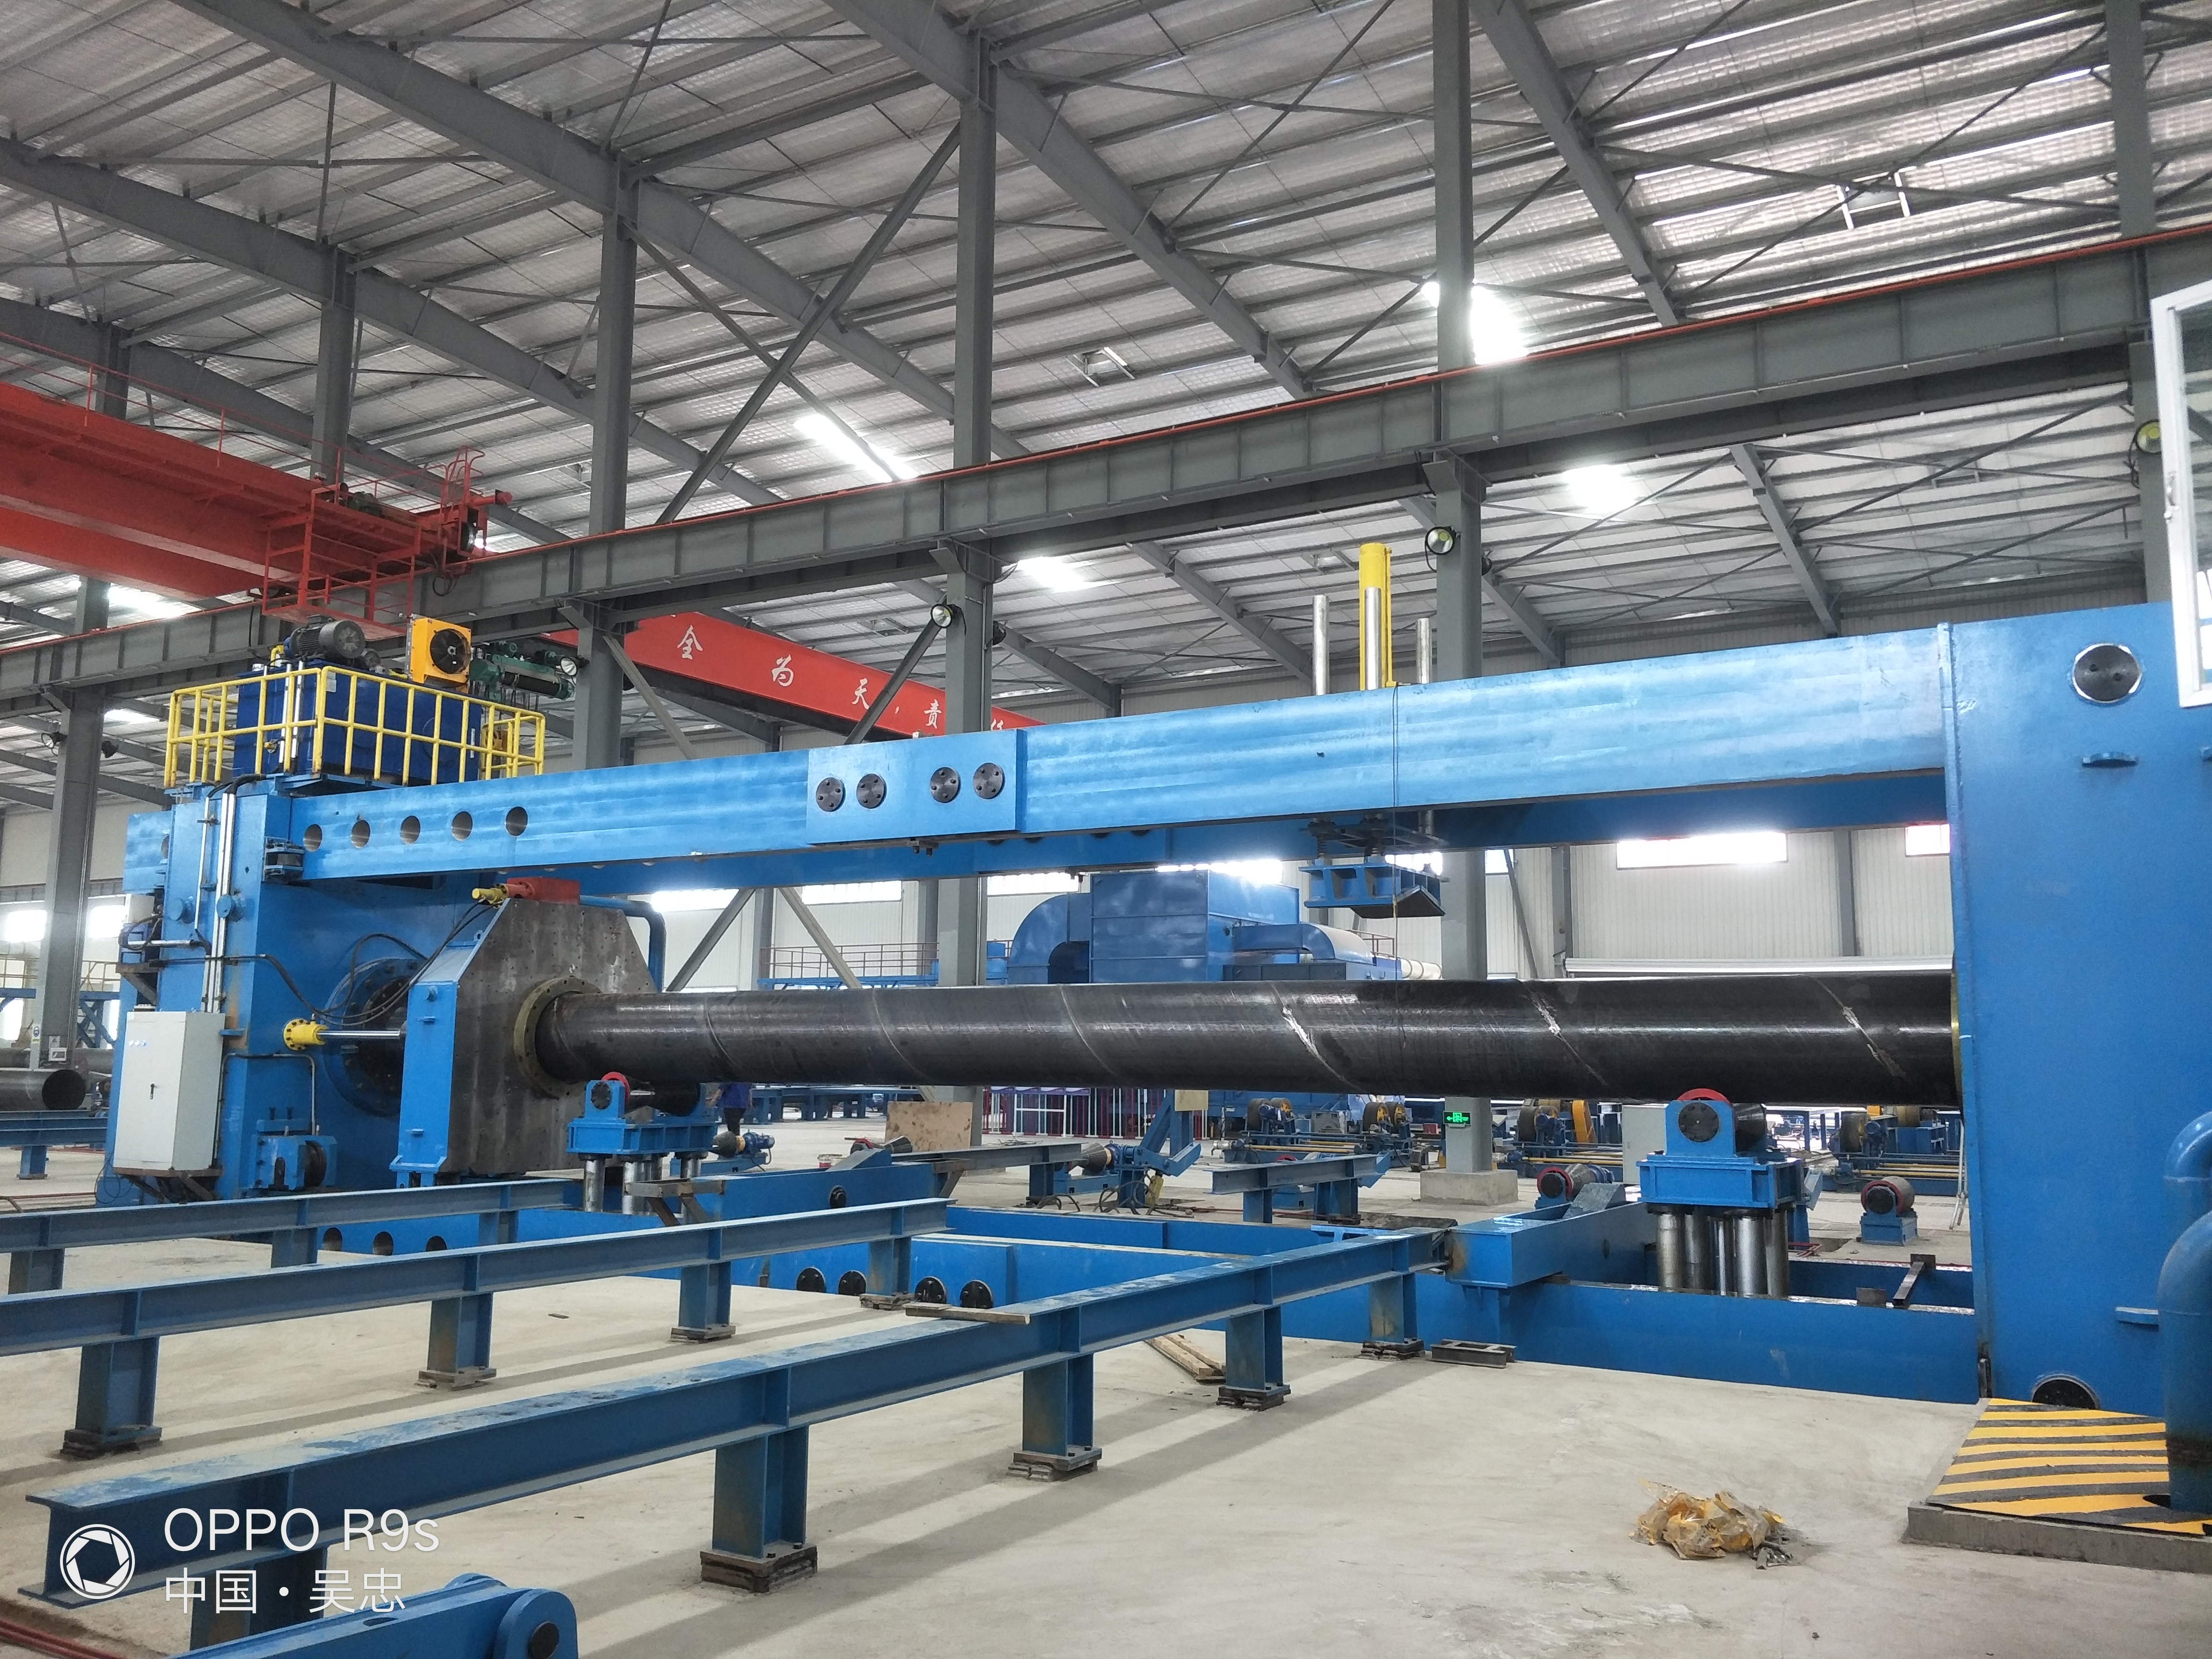 Spiral welded pipe equipment manufacturers describe the production process of spiral steel pipes